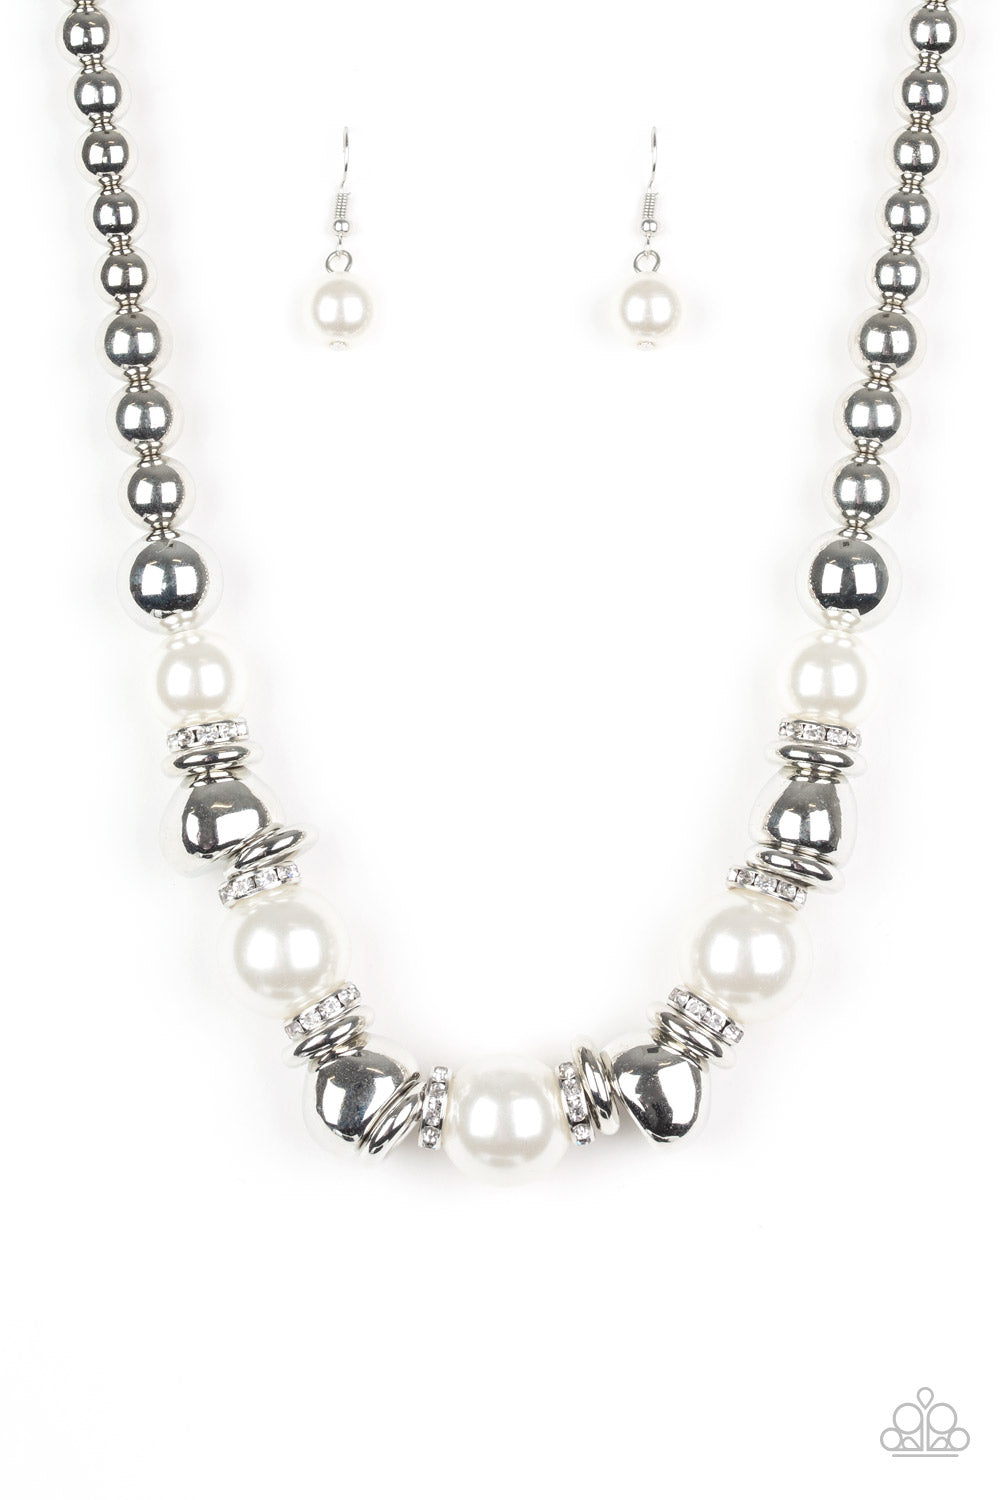 Hollywood HAUTE Spot - White - Bling With Crystal